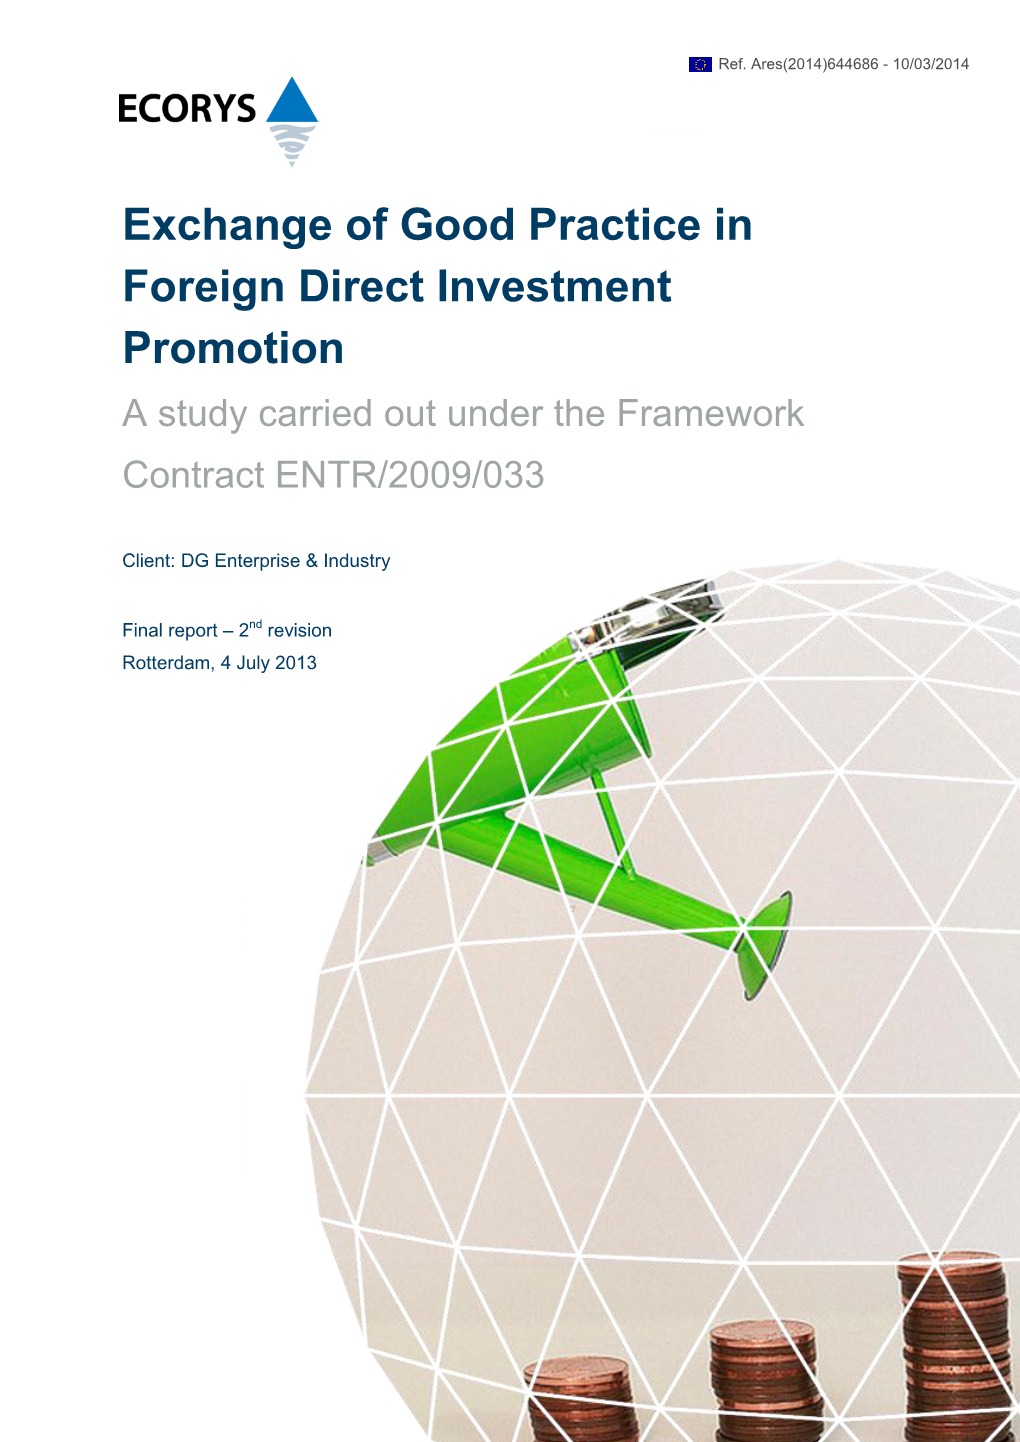 Exchange of Good Practice in Foreign Direct Investment Promotion a Study Carried out Under the Framework Contract ENTR/2009/033